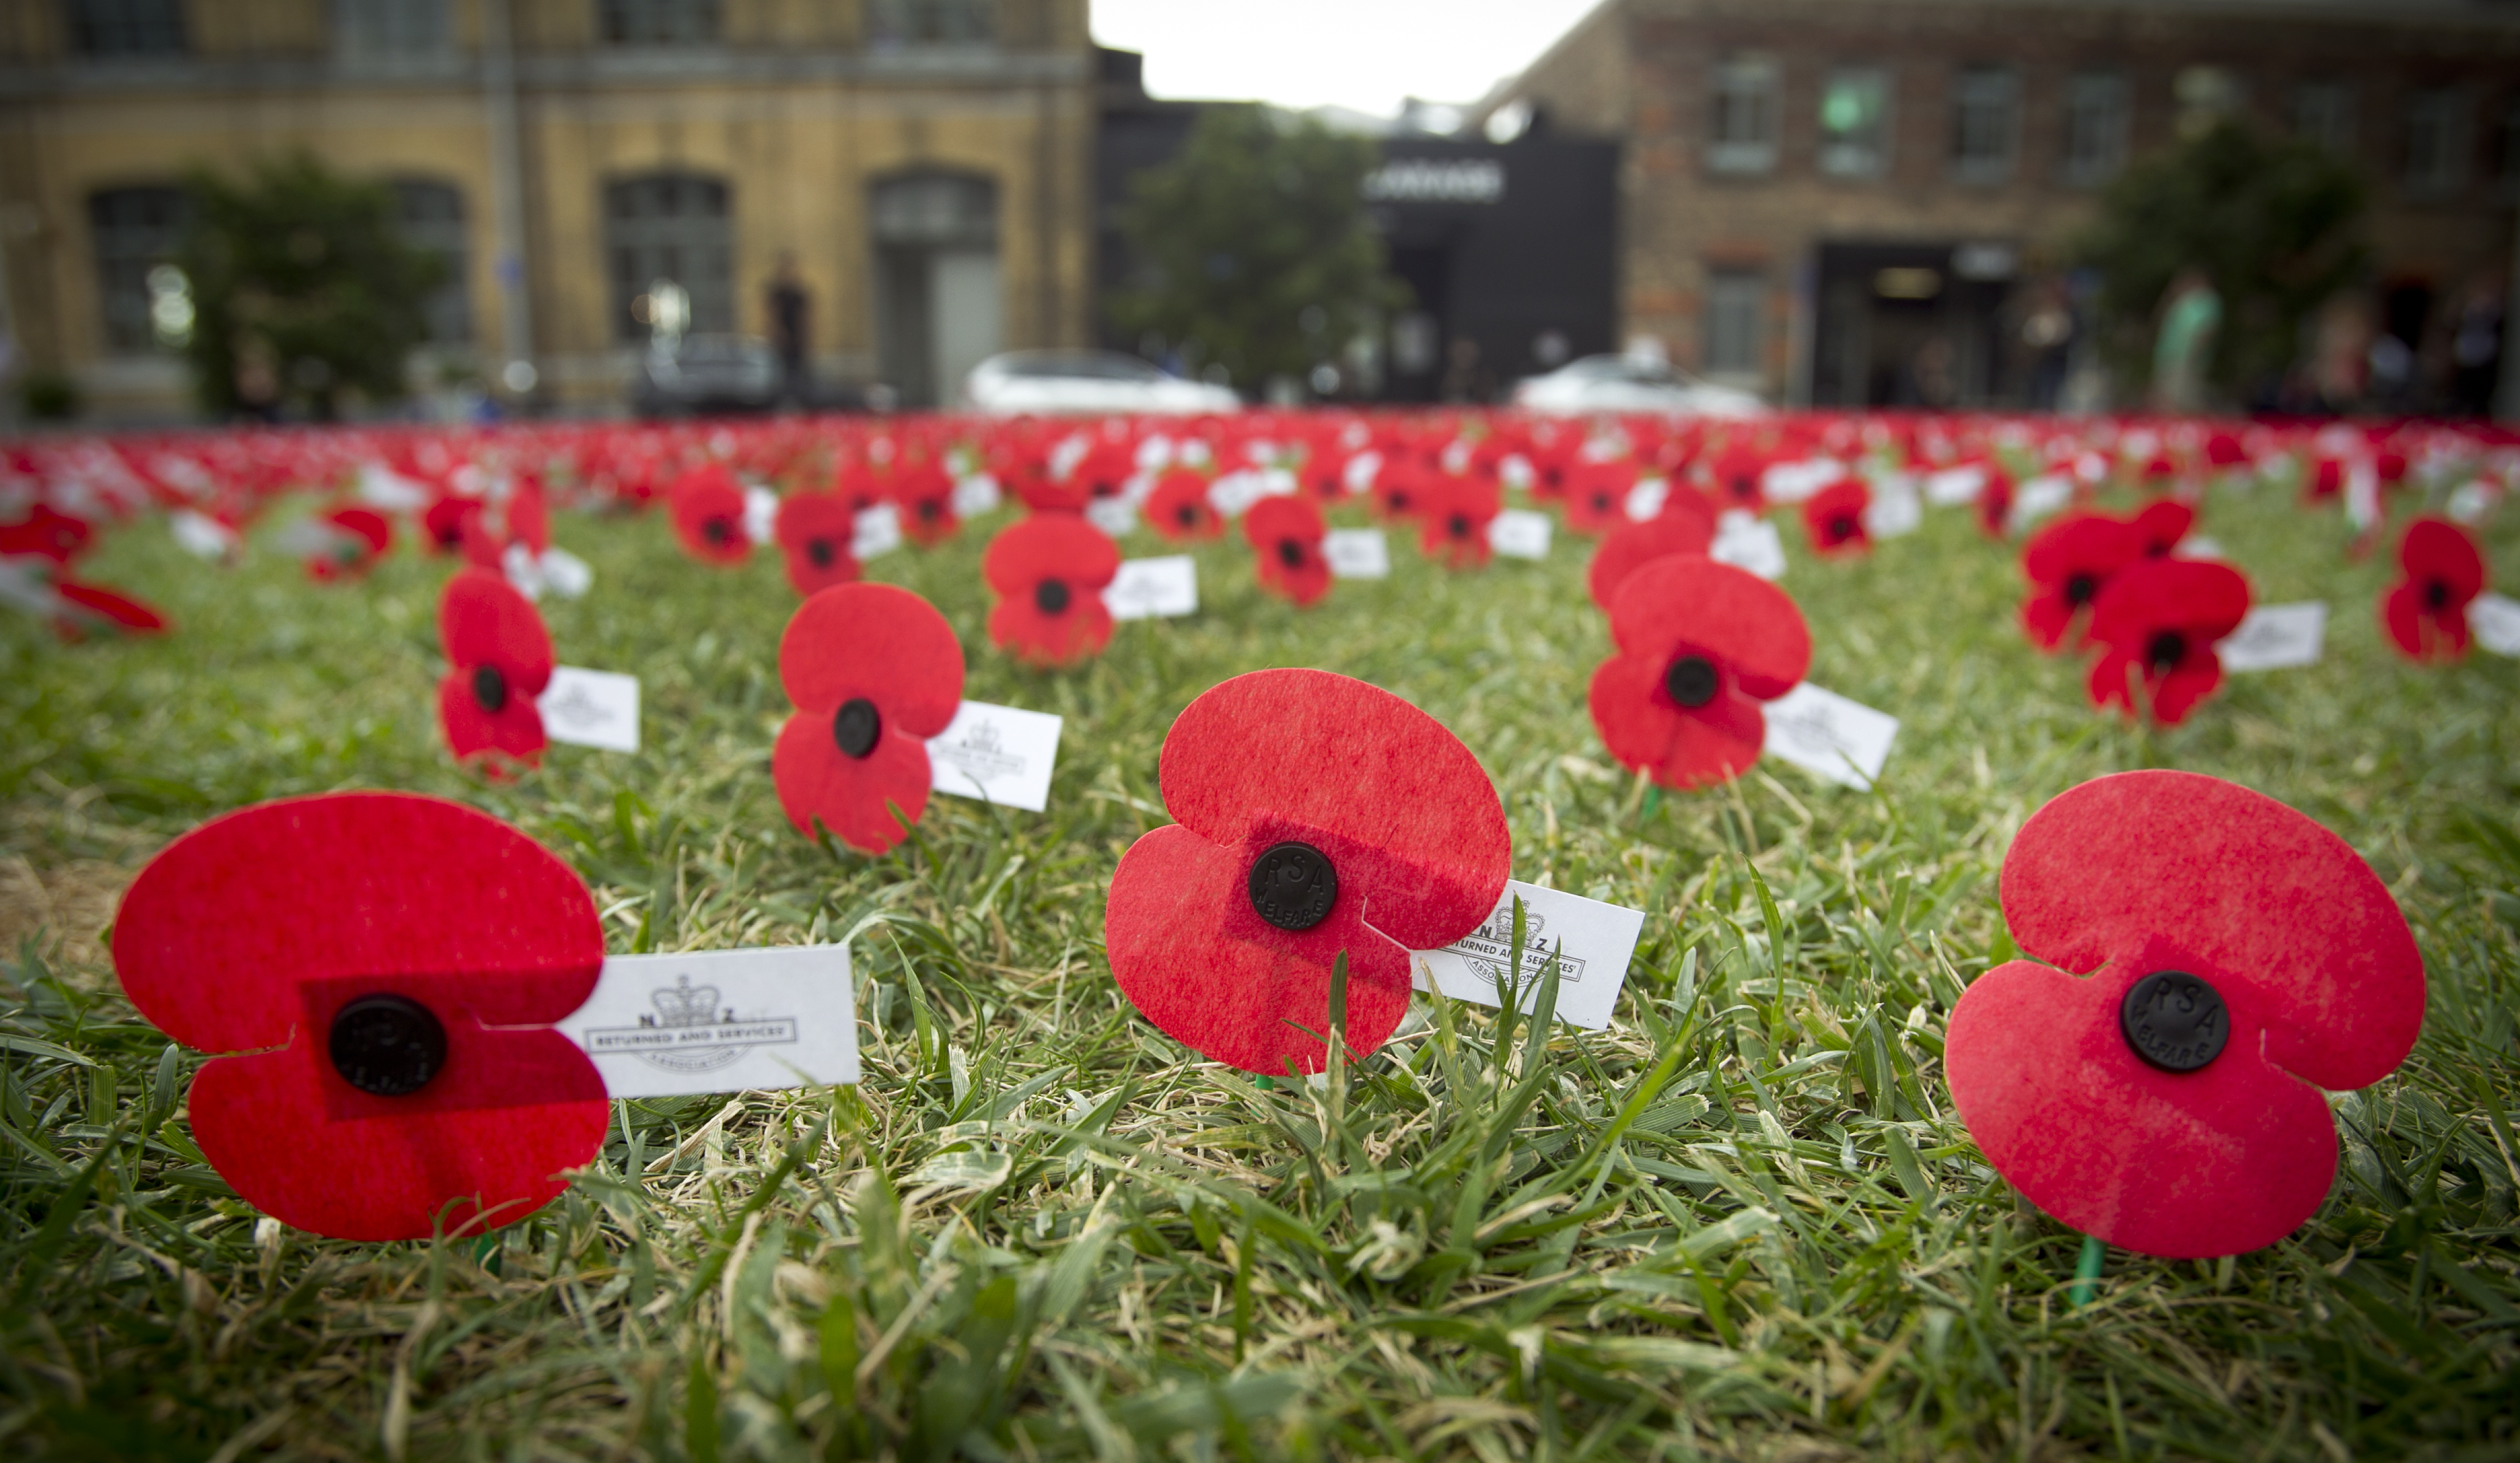 Six interesting facts about the poppy